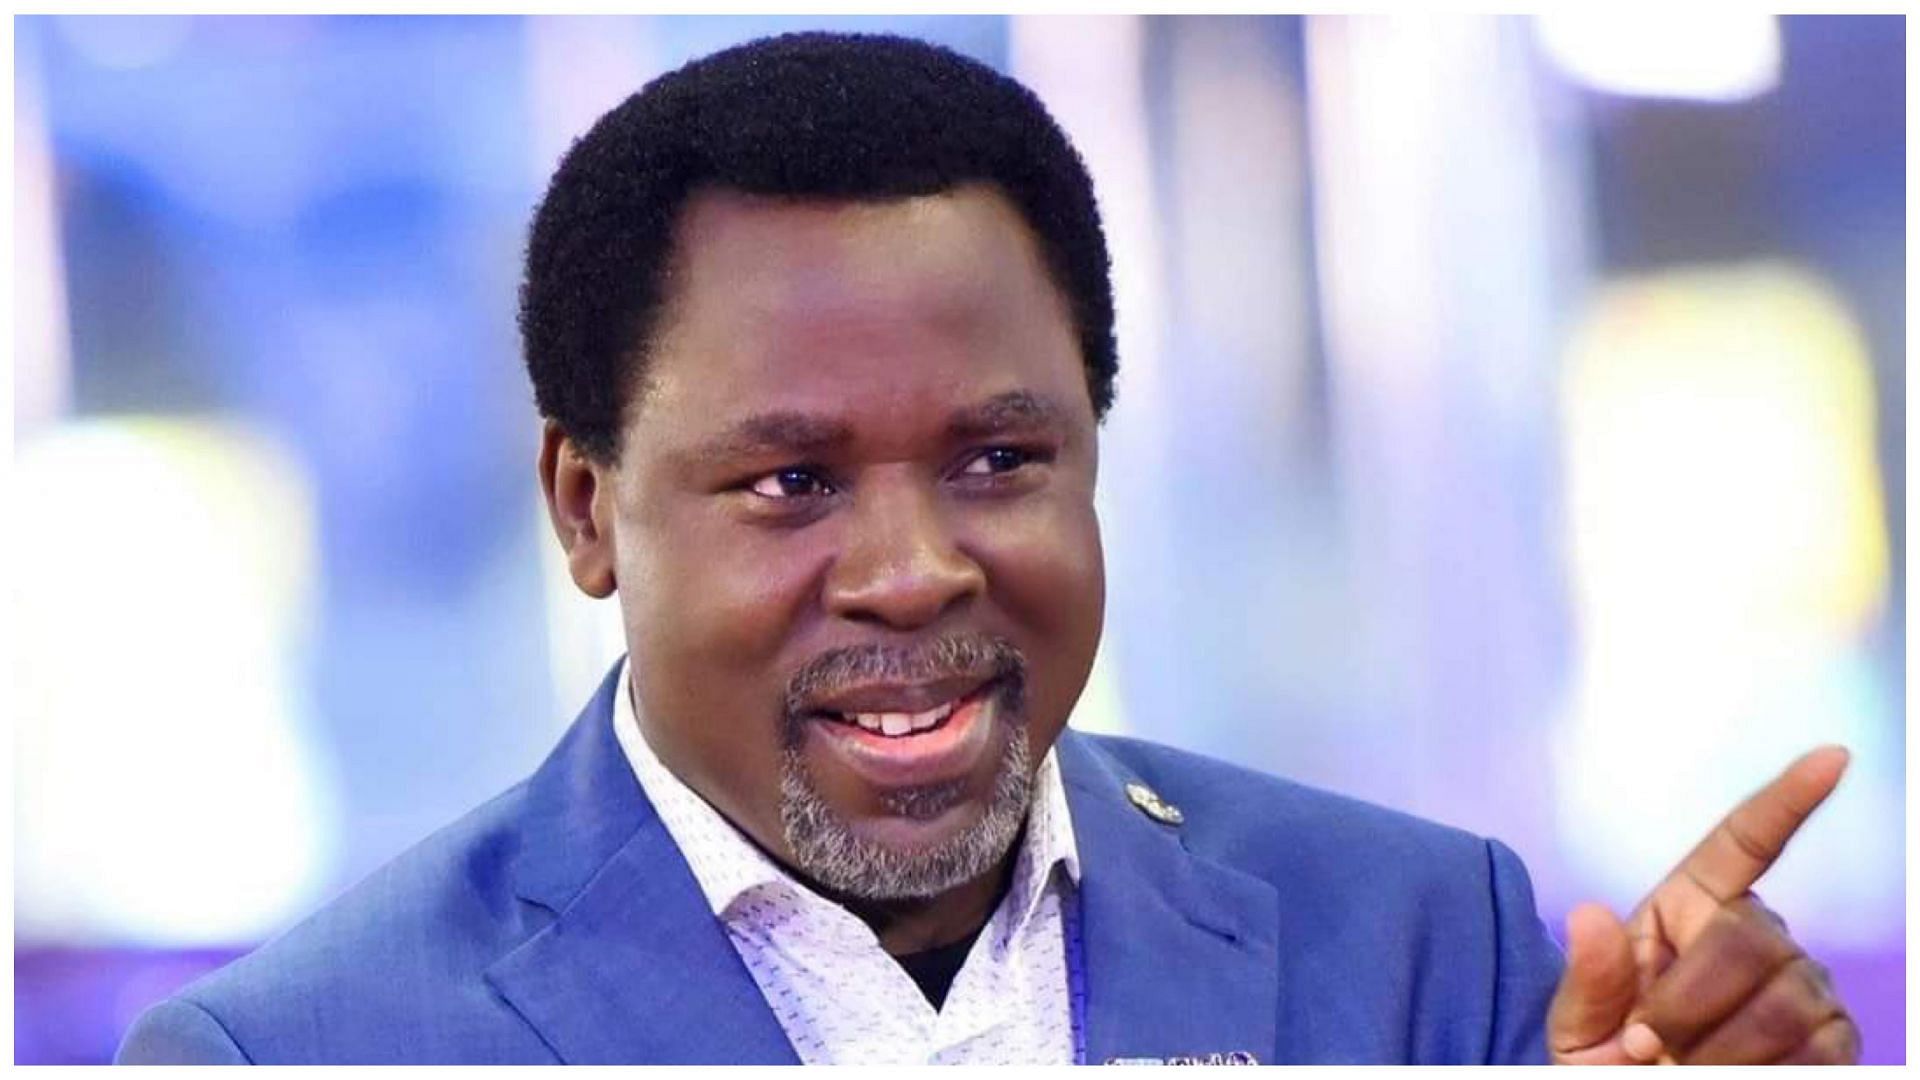 TB Joshua accused of r*pe and torture in new BBC documentary (Image via @officiallordy/X)